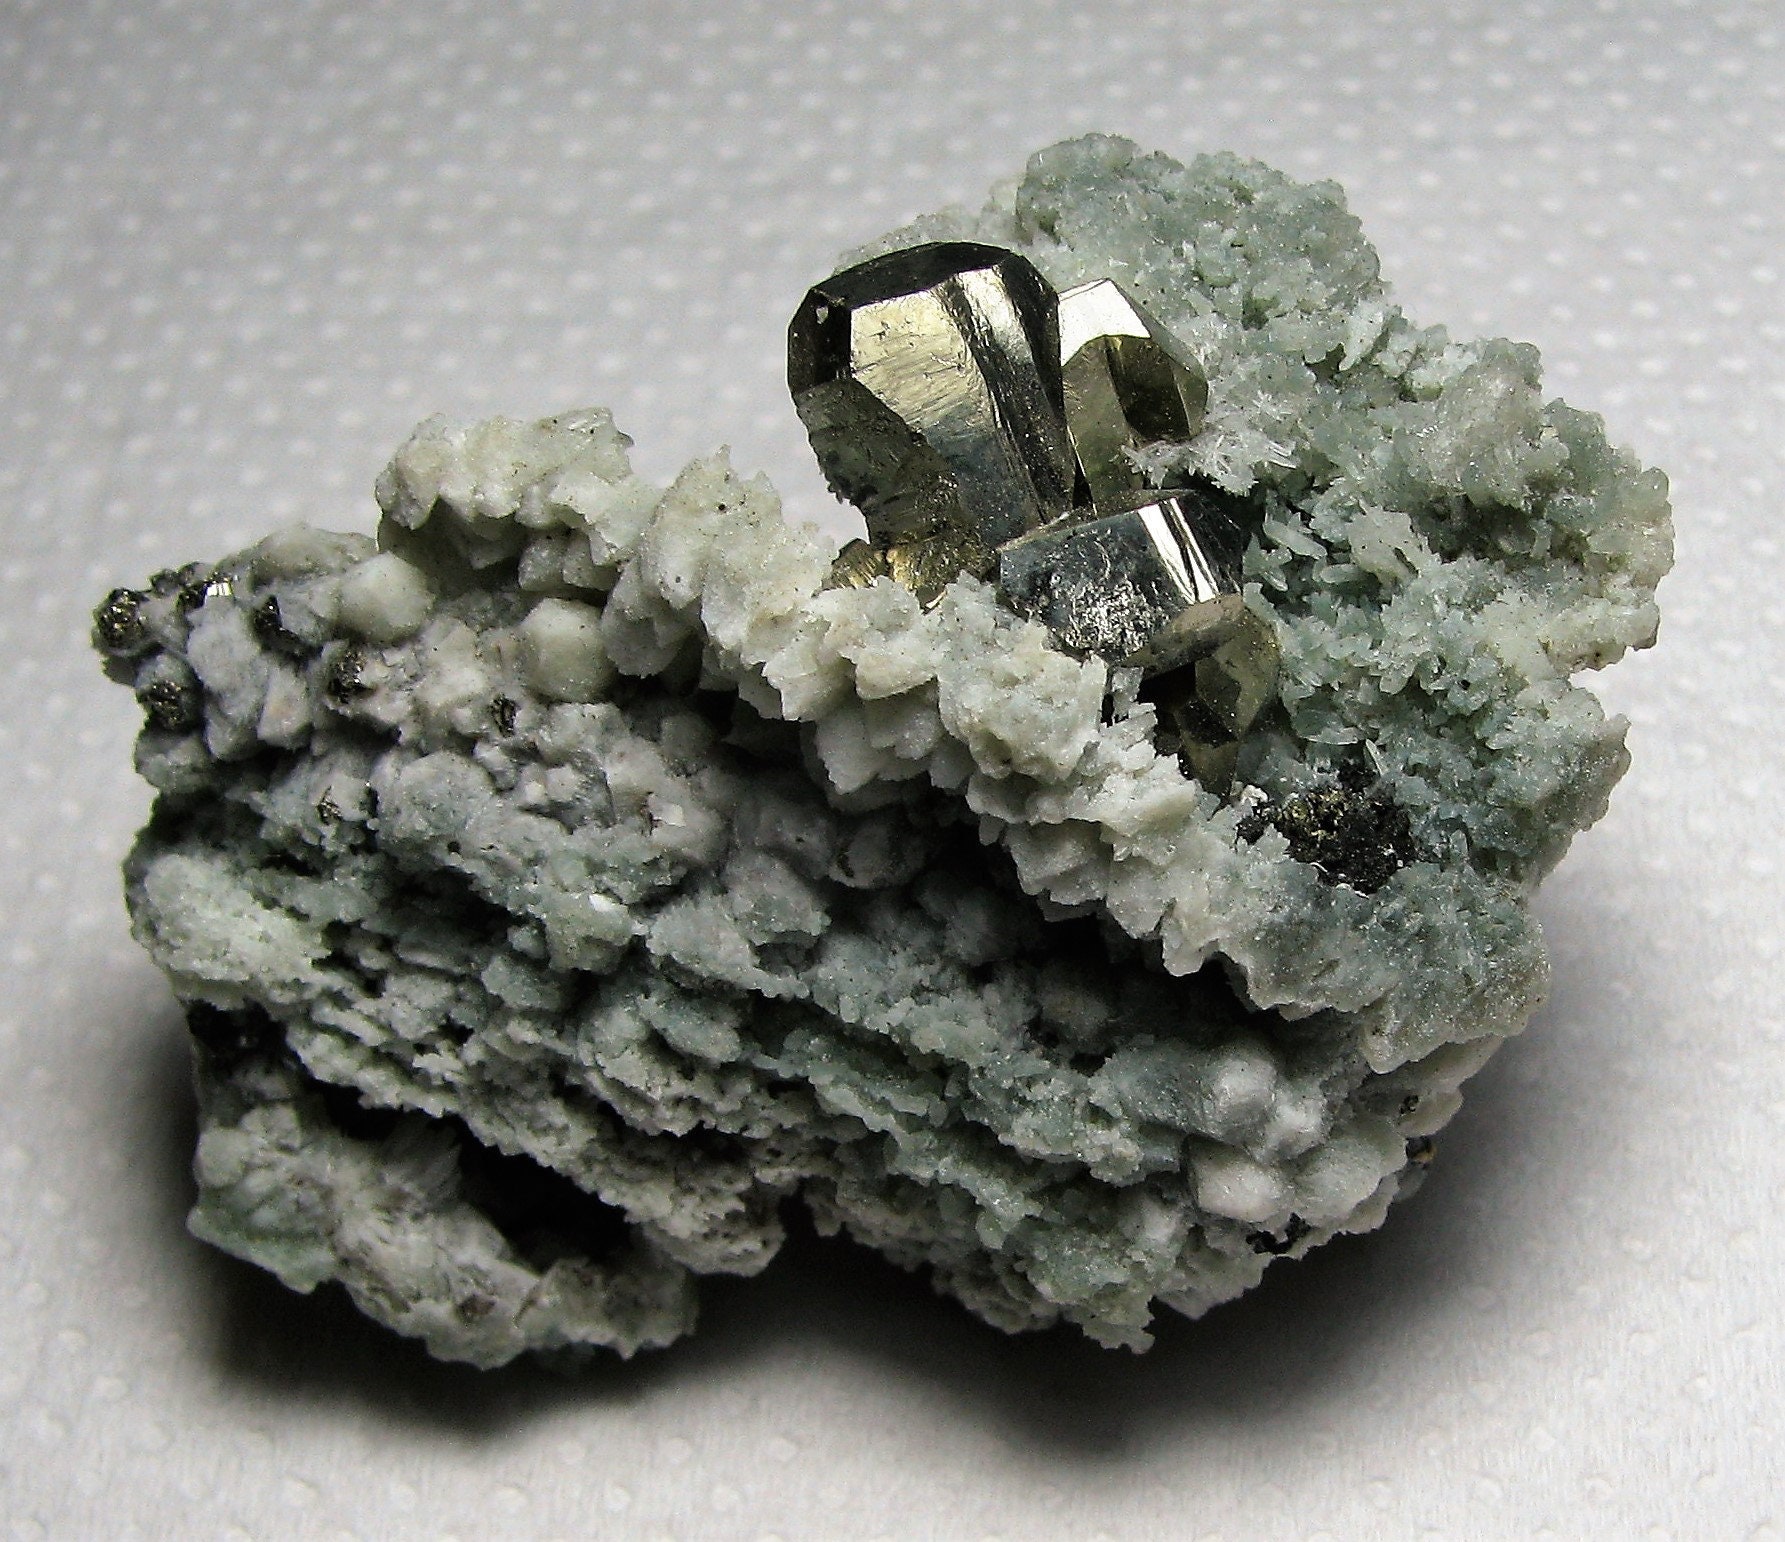 Very aesthetic shiny pyrite on green quartz with chloride includings from the famous 9th of September mine Bulgaria N2708 Madan